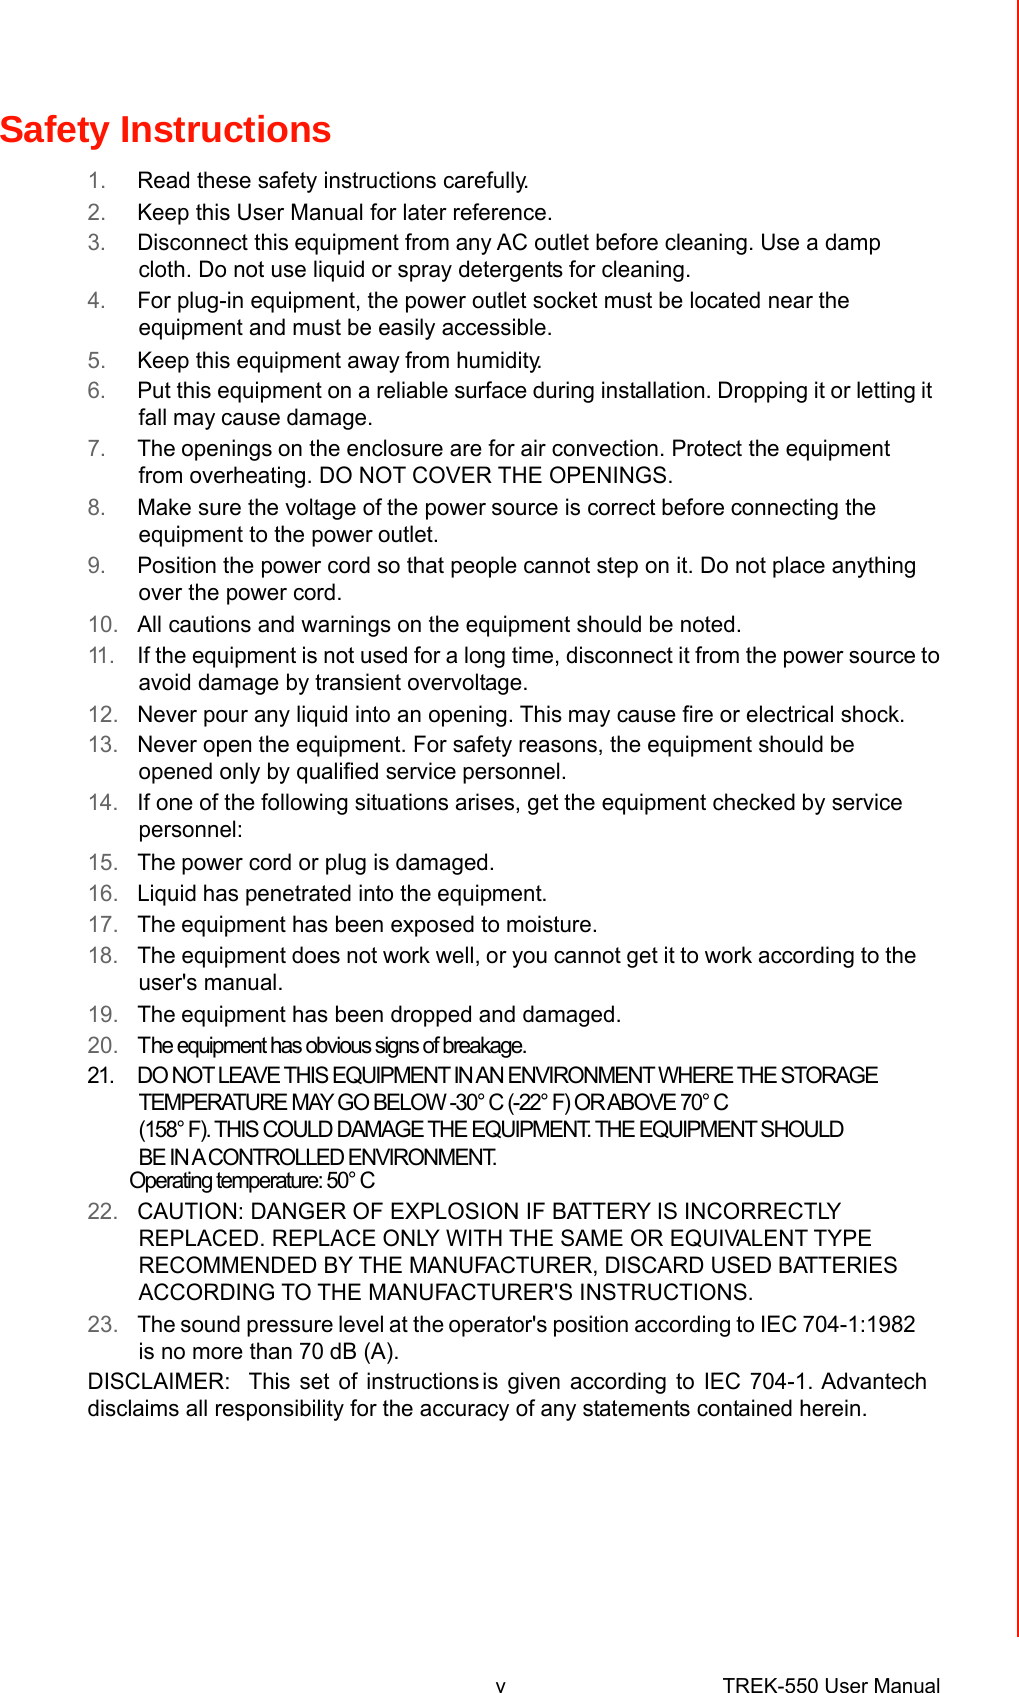 Safety Instructions  1.Read these safety instructions carefully. 2.Keep this User Manual for later reference. 3.Disconnect thisequipment fromany AC outlet before cleaning. Use a dampcloth. Do not use liquid or spray detergents for cleaning. 4.For plug-in equipment, the power outlet socket must be located nearthe equipment and must be easily accessible. 5.Keep this equipment awayfrom humidity. 6.Put this equipment on a reliable surface during installation.Dropping it or lettingit fall maycausedamage. 7.Theopeningson the enclosure are for air convection. Protect the equipmentfrom overheating. DO NOT COVER THE OPENINGS. 8.Make sure the voltage ofthe powersource is correctbeforeconnecting theequipment to the poweroutlet. 9.Position the power cord so that peoplecannot step on it. Do not place anythingover the power cord. 10.All cautions and warnings on the equipment should be noted. 11 .If the equipment is not used for a long time, disconnect it from the power sourceto avoid damage by transient overvoltage. 12.Never pour any liquid into an opening. Thismay cause fire or electrical shock. 13.Never openthe equipment. For safety reasons, the equipment shouldbeopened only by qualified servicepersonnel. 14.If one of the following situations arises, get the equipment checkedby servicepersonnel: 15.Thepower cord or plug is damaged. 16.Liquidhas penetrated into theequipment. 17.Theequipment has been exposed to moisture. 18.The equipment does not work well,or you cannot get it to work according to theuser&apos;s manual. 19.Theequipment has been dropped and damaged. 20.The equipment has obvious signs of breakage. 21.  DO NOT LEAVE THIS EQUIPMENT IN AN ENVIRONMENT WHERE THE STORAGE TEMPERATURE MAY GO BELOW -30° C (-22° F) OR ABOVE 70° C (158° F). THIS COULD DAMAGE THE EQUIPMENT. THE EQUIPMENT SHOULD BE IN A CONTROLLED ENVIRONMENT. Operating temperature: 50° C 22.CAUTION: DANGER OF EXPLOSION IF BATTERY IS INCORRECTLYREPLACED. REPLACE ONLYWITH THE SAME OR EQUIVALENT TYPERECOMMENDED BY THE MANUFACTURER, DISCARD USEDBATTERIESACCORDING TO THE MANUFACTURER&apos;S INSTRUCTIONS. 23.Thesound pressure levelat theoperator&apos;s position according to IEC 704-1:1982 is no more than 70dB (A). DISCLAIMER:This set of instructionsis given according to IEC 704-1. Advantechdisclaims all responsibility for the accuracy of anystatements contained herein.             vTREK-550 User Manual 